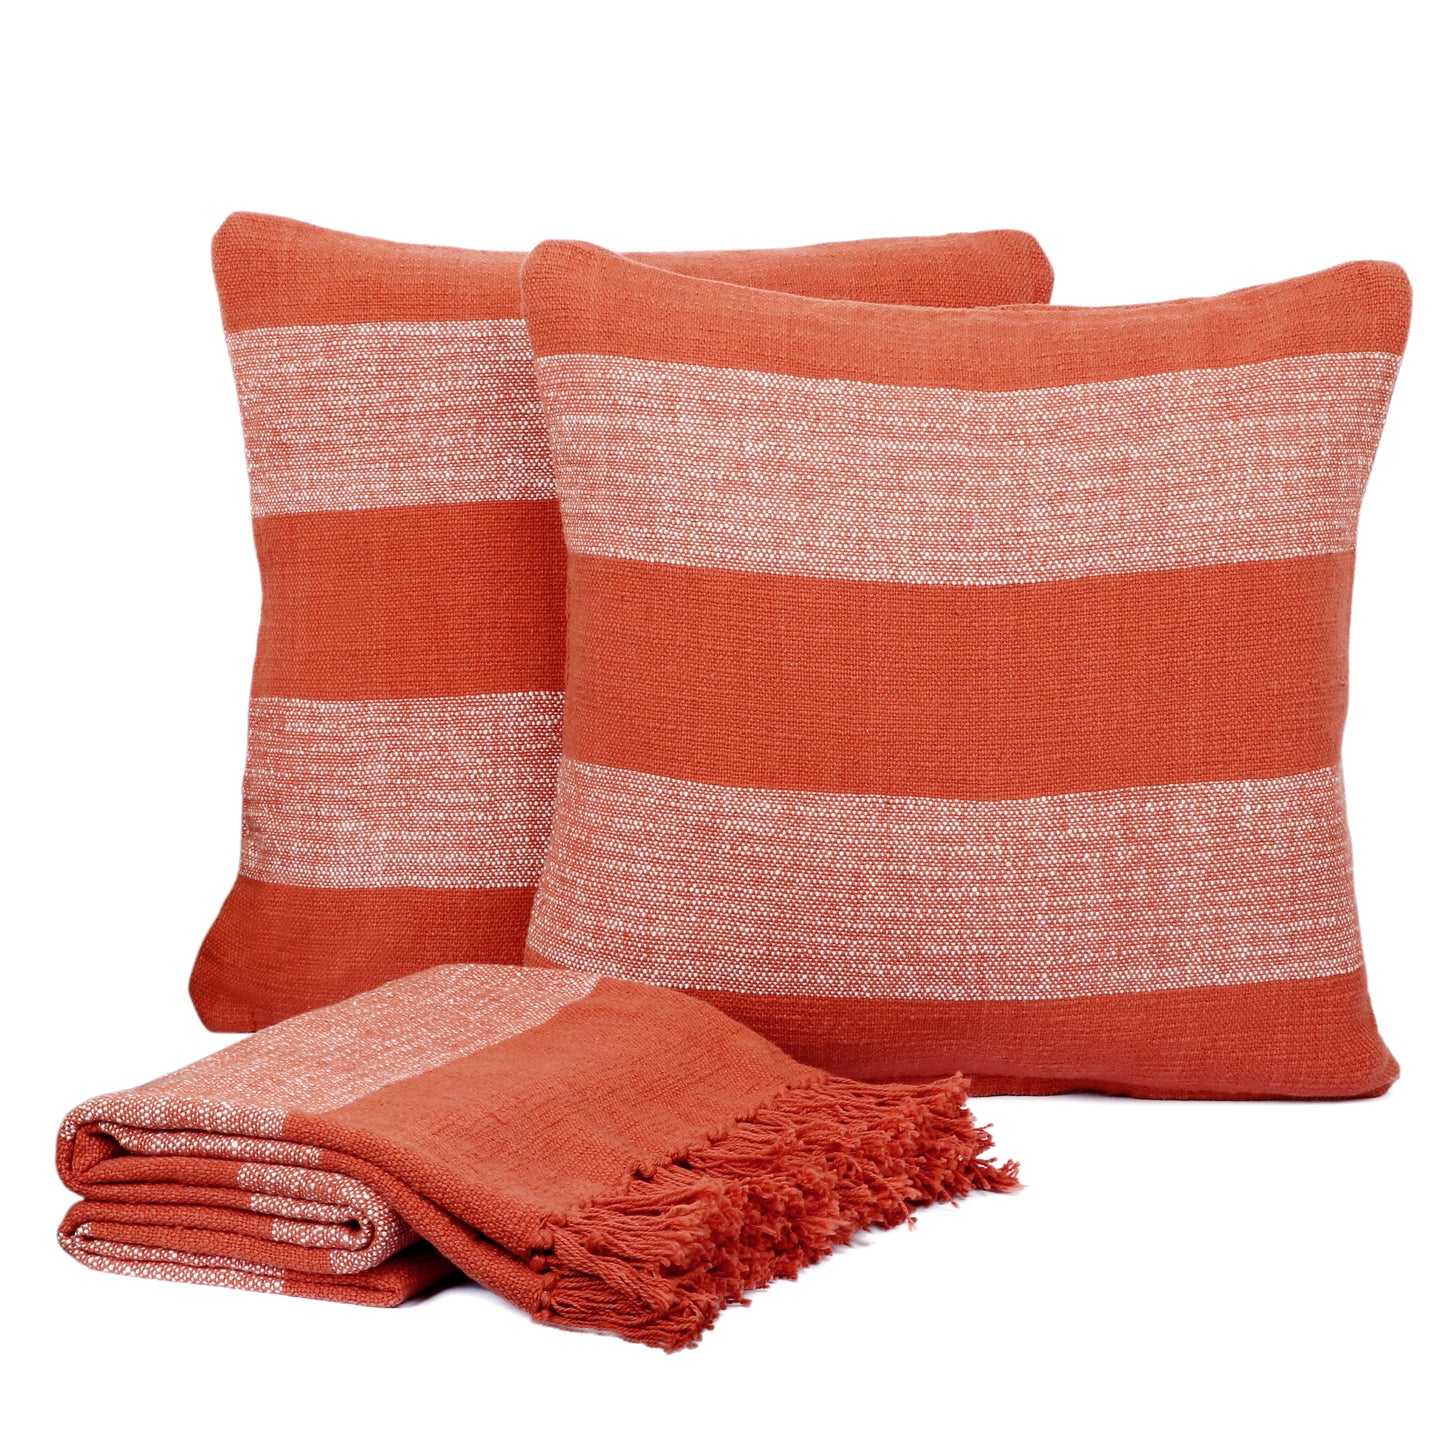 Combo Deal - Stripe design - Cotton throw blanket and pillow cases - TreeWool Bundle Deal#color_rust